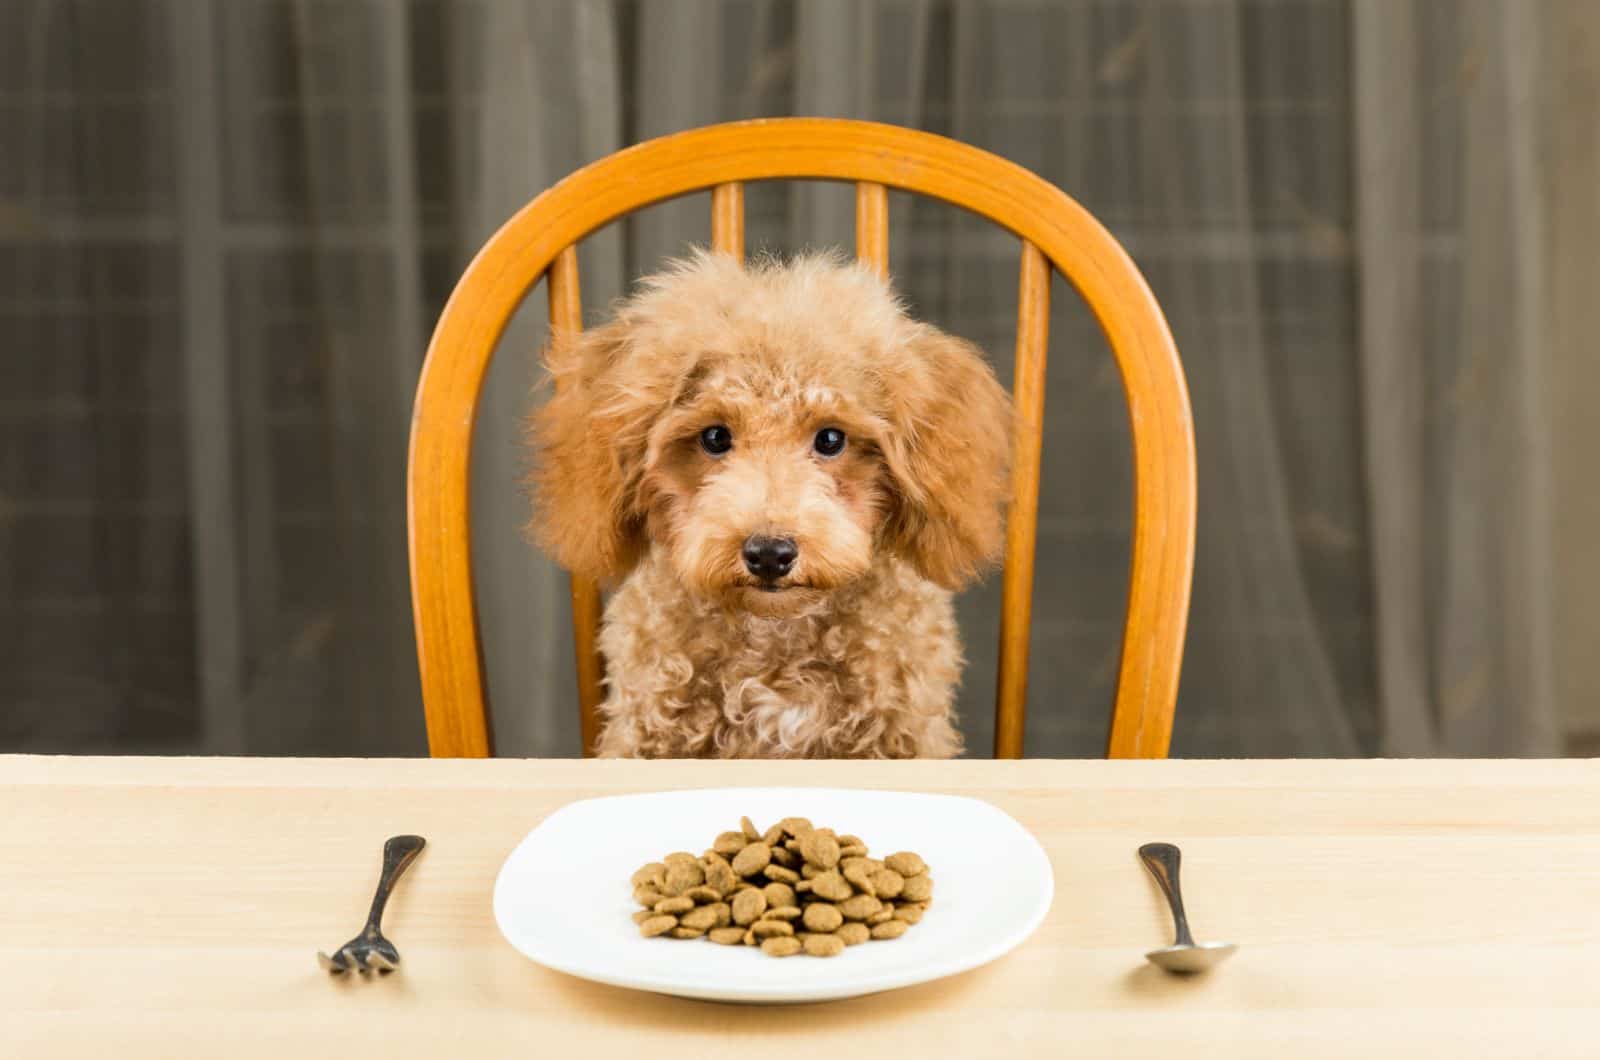 Poodle sitting and waiting for food